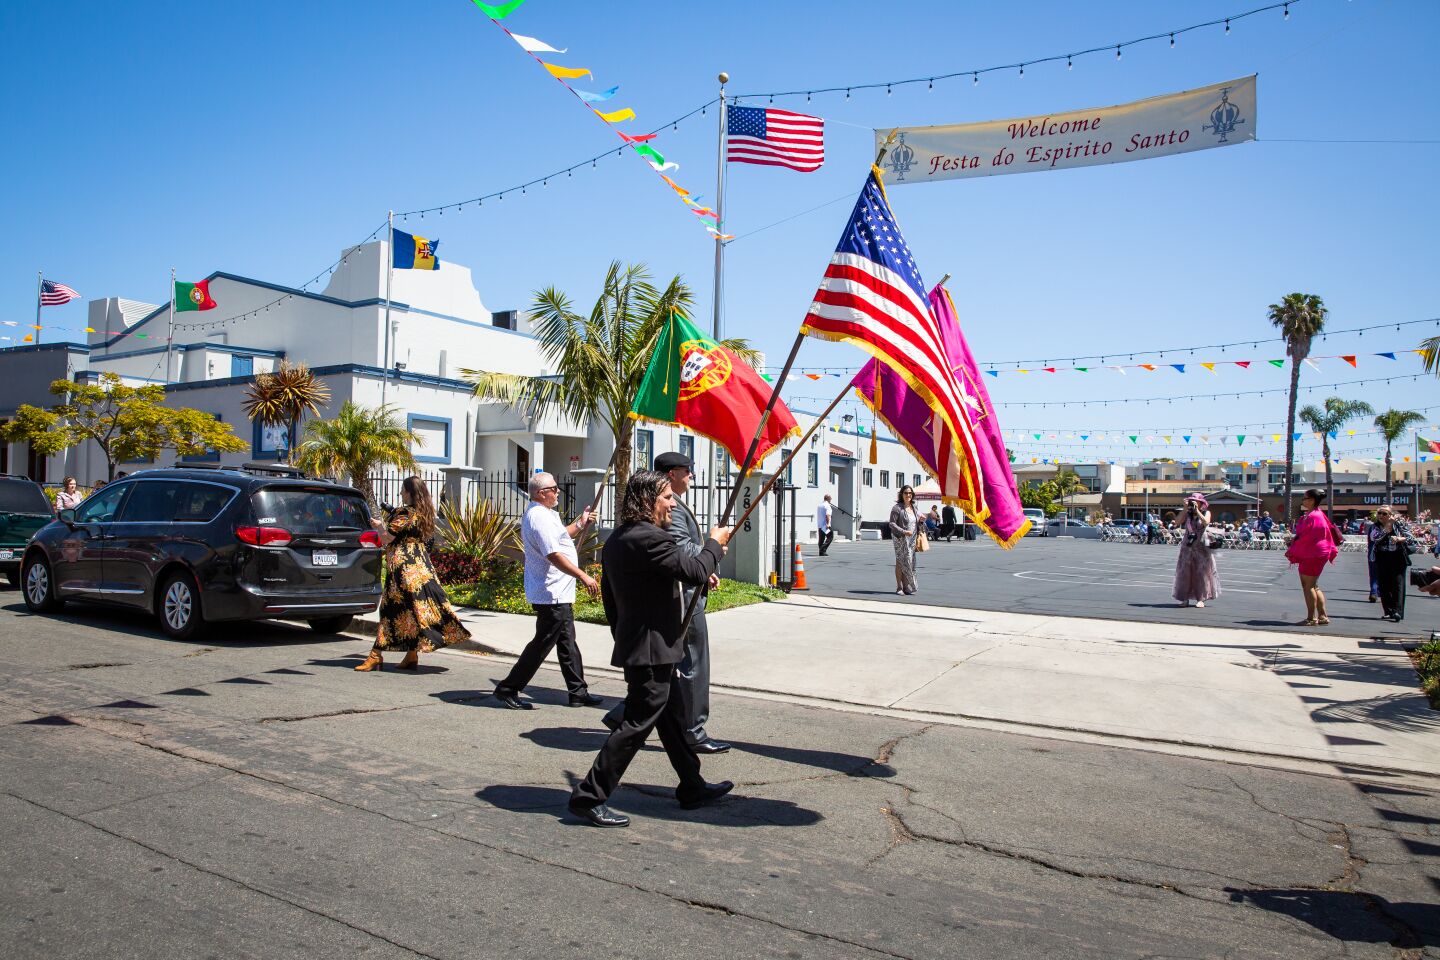 Jerry Balelo (foreground), Jose Virissimo (center) and Manuel Virissimo carry the flags for the Festa do Espirito Santo (Feast of the Holy Spirit) ceremonies May 23.